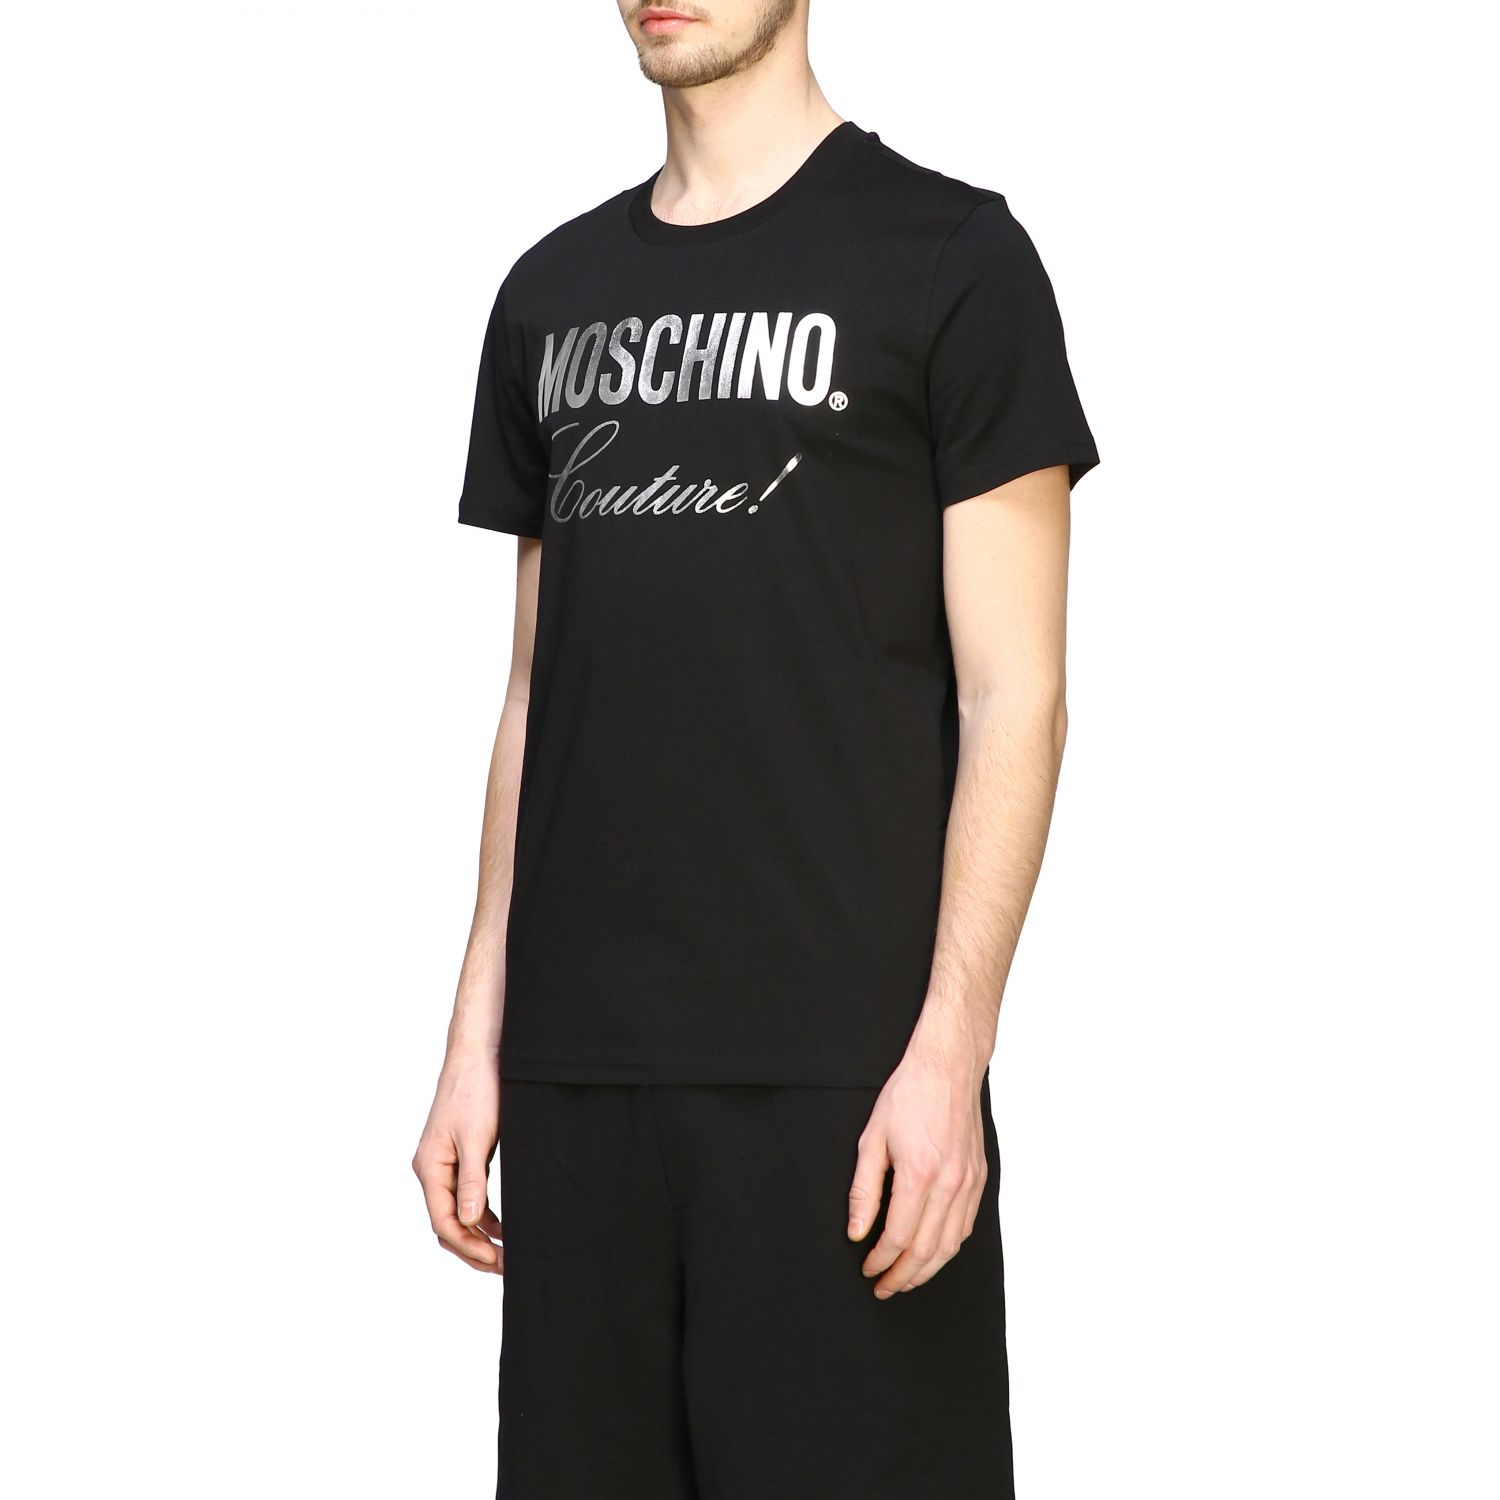 Moschino Couture short-sleeved T-shirt with laminated logo print | T ...